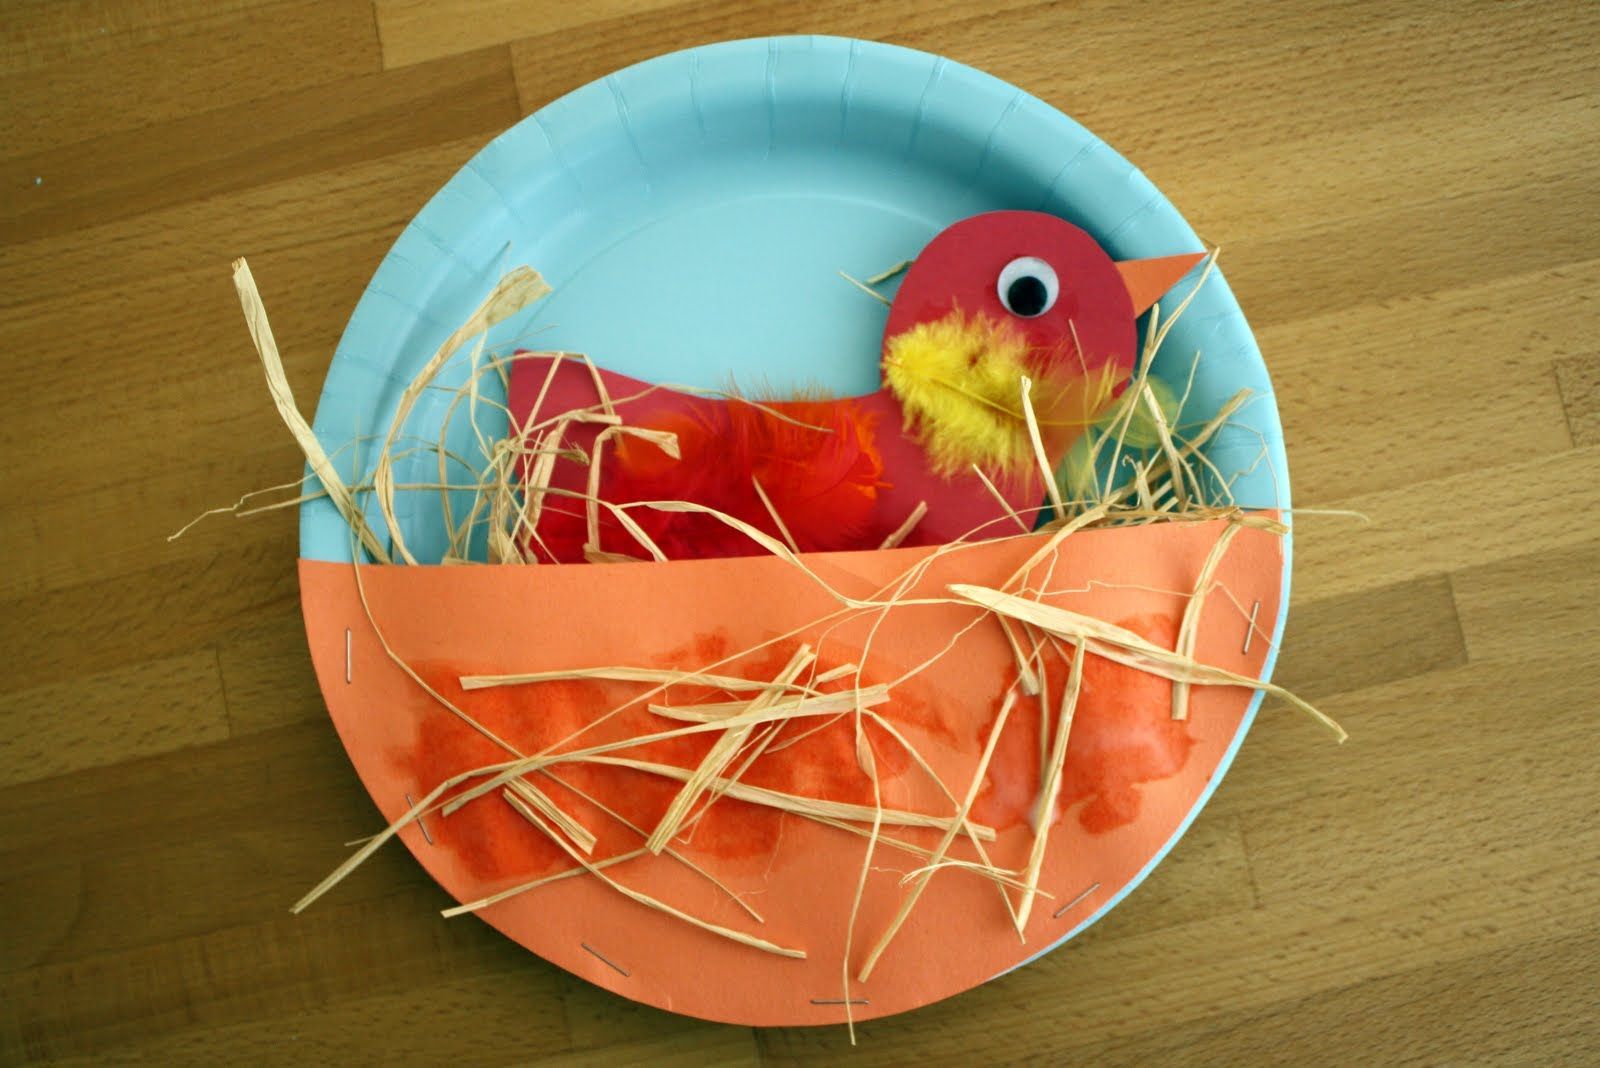 Bird nest craft – great craft to tie into lesson on how Jesus cares for us.